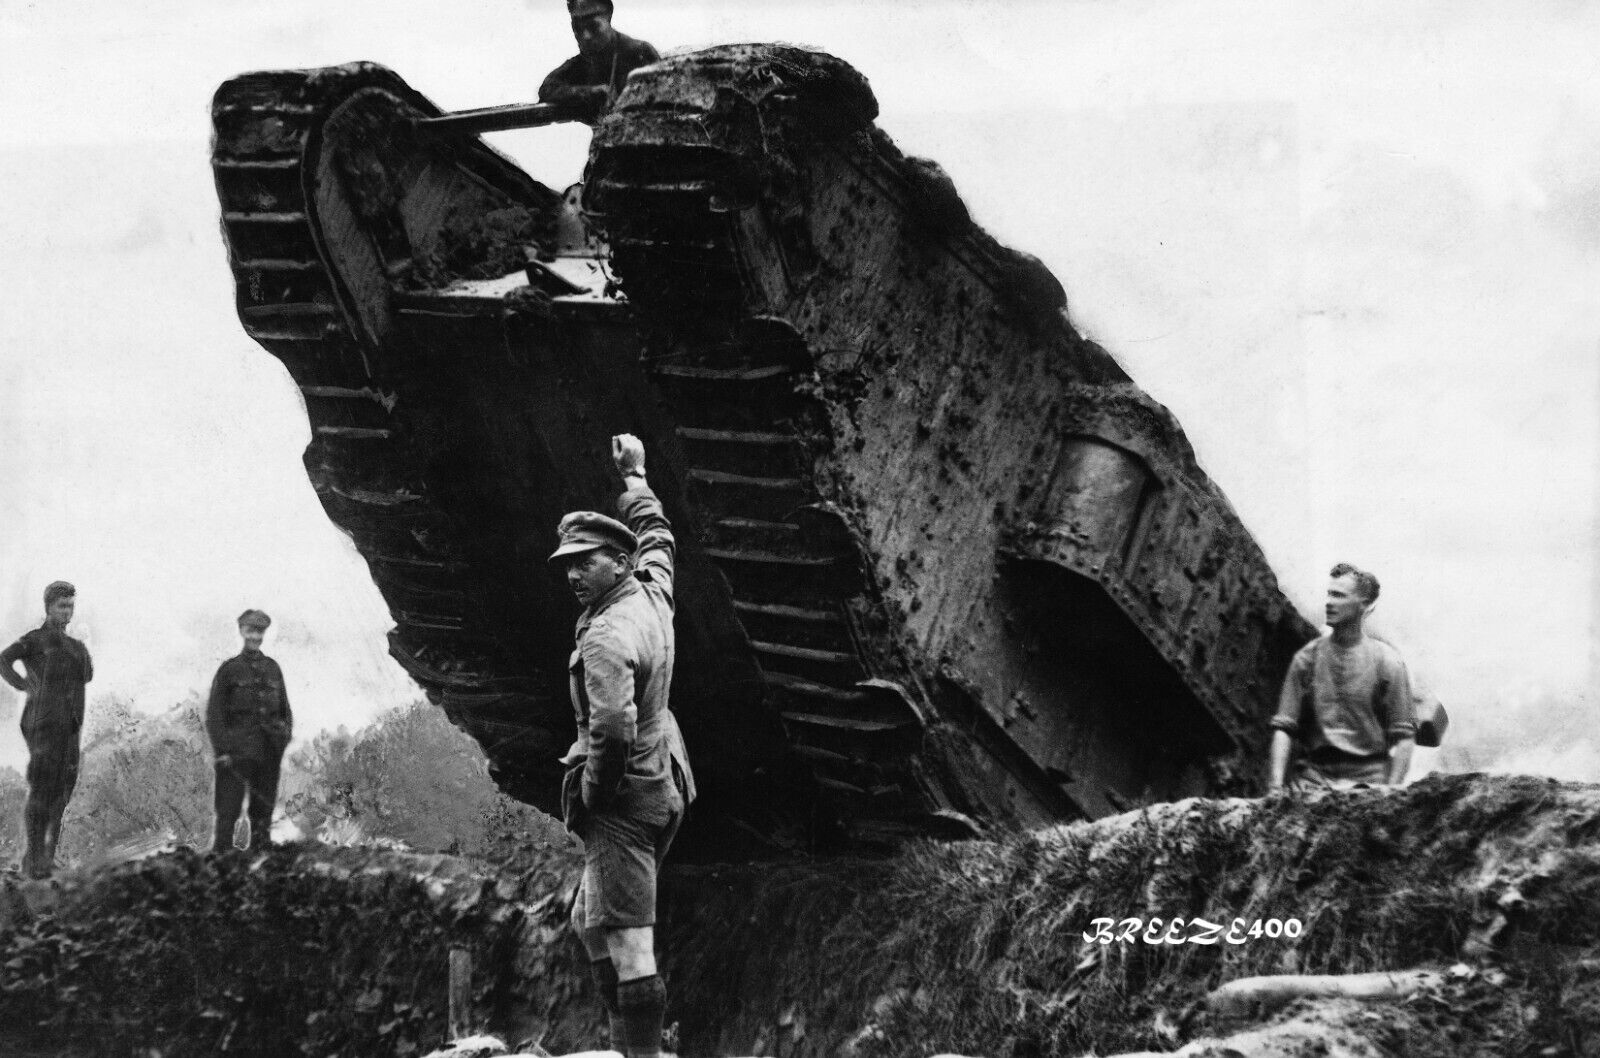 WW I PHOTO/ 1918 BRITISH TANK IN THE TRENCHES/4X6 B&W Photo Reprint